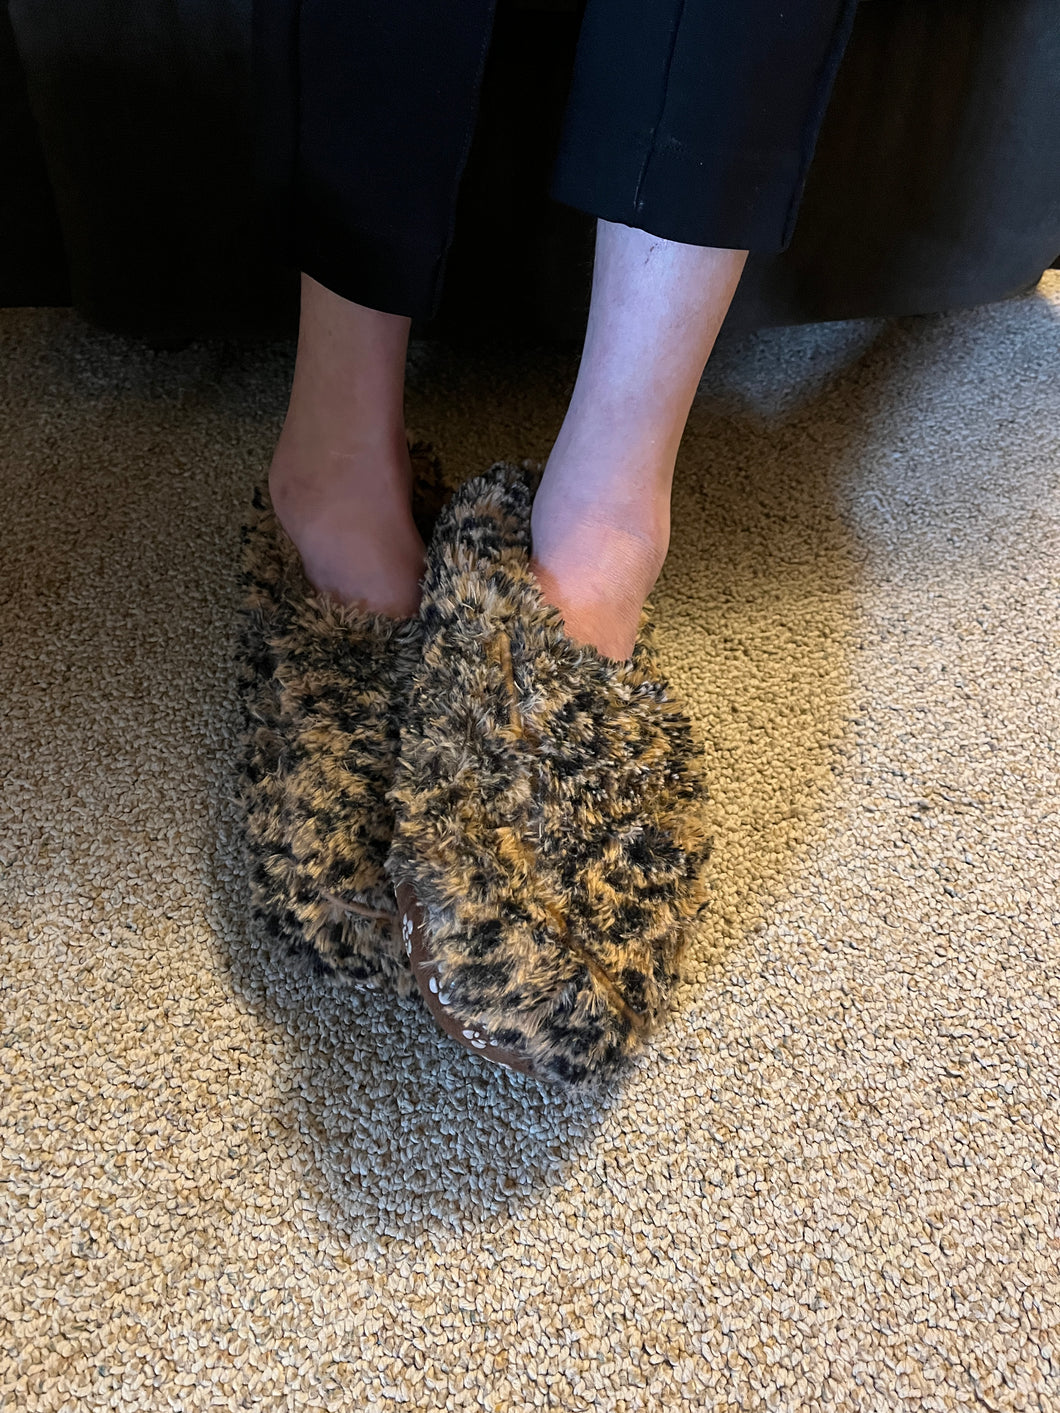 Shaggy leopard slippers on a person's feet.